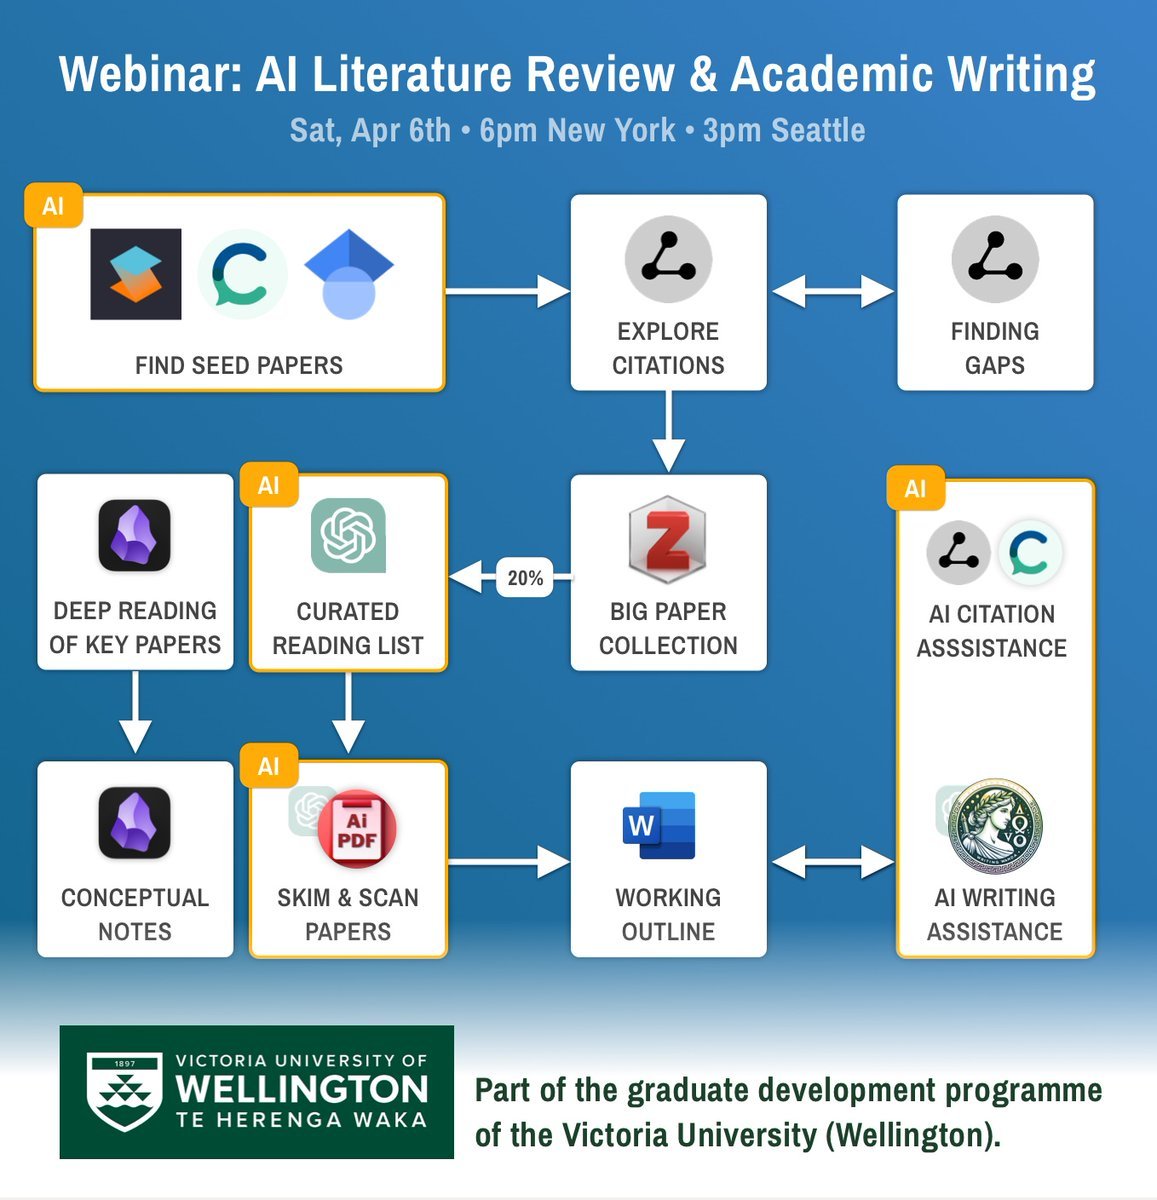 Frustrated with your literature review process?

📢 Join @Artifexx for his Webinar tomorrow on how to use AI tools for your literature review process!

Sign-up here: effortlessacademic.com/elr3-webinar/

Ilya is one of the important and impactful voices in our space and his webinar will be